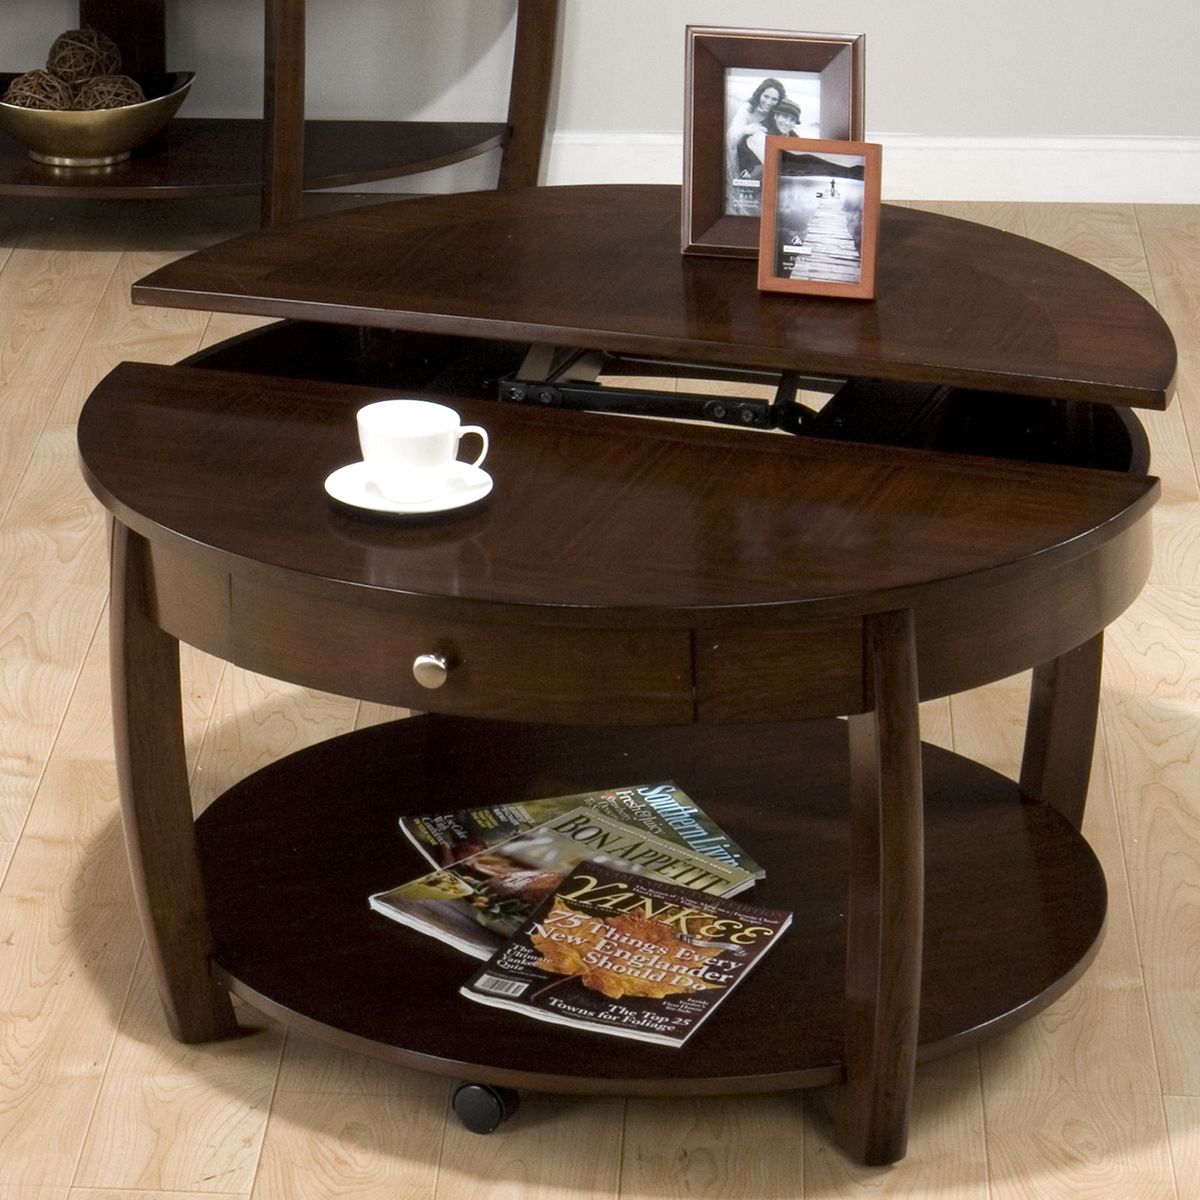 The Round Coffee Tables With Storage – The Simple And Compact Furniture Inside Coffee Tables With Round Wooden Tops (Gallery 20 of 20)